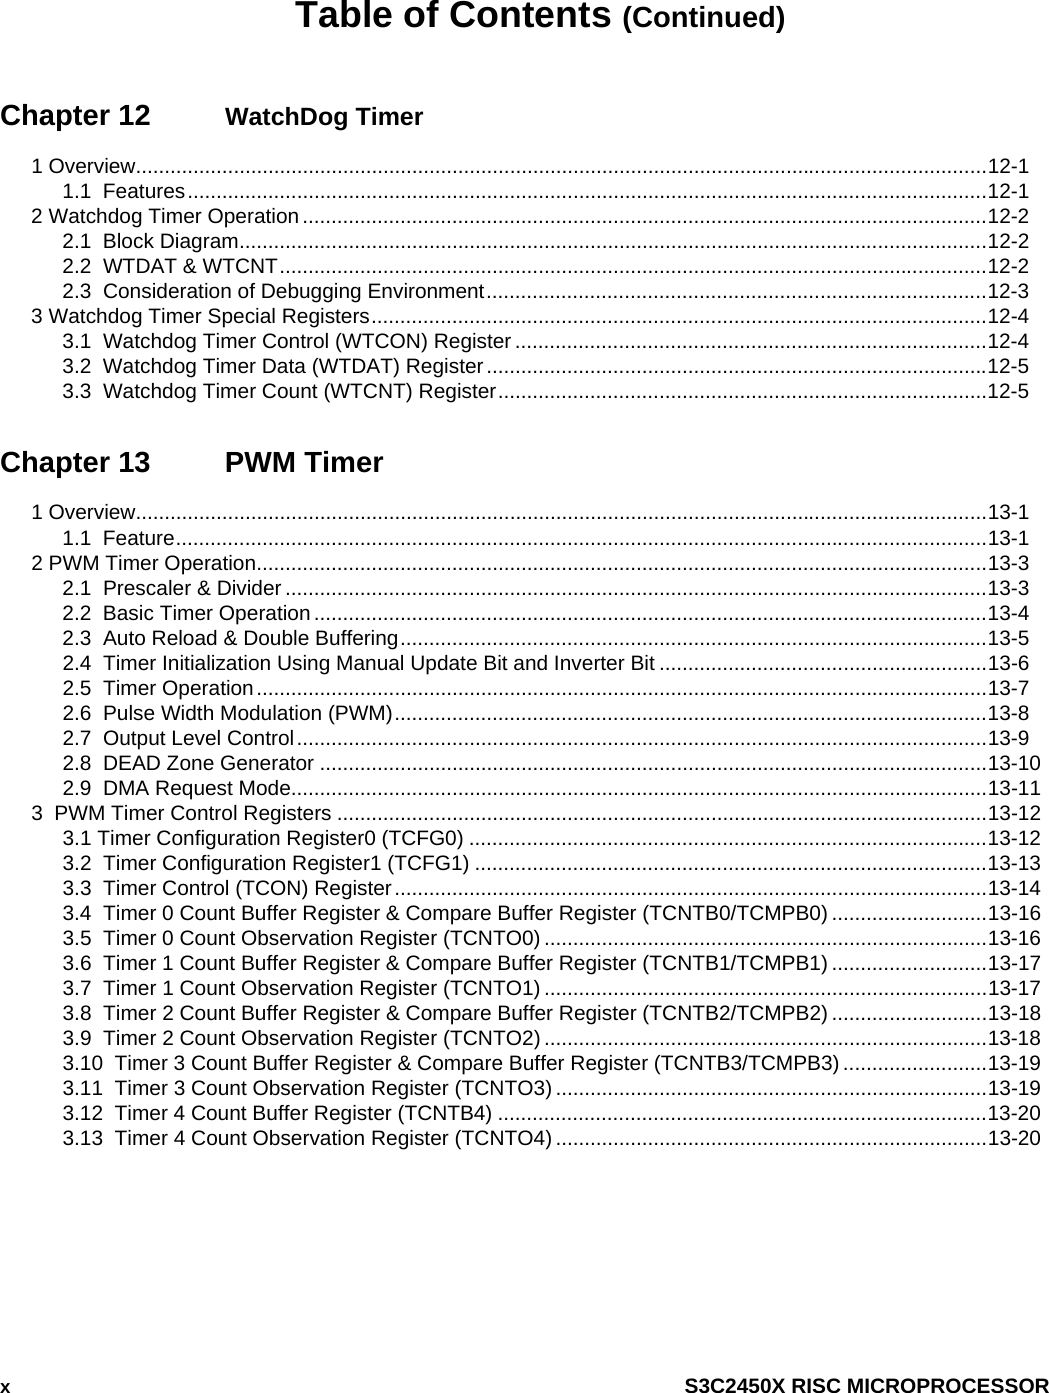  x  S3C2450X RISC MICROPROCESSOR Table of Contents (Continued) Chapter 12  WatchDog Timer 1 Overview....................................................................................................................................................12-1 1.1  Features...........................................................................................................................................12-1 2 Watchdog Timer Operation .......................................................................................................................12-2 2.1  Block Diagram..................................................................................................................................12-2 2.2  WTDAT &amp; WTCNT...........................................................................................................................12-2 2.3  Consideration of Debugging Environment.......................................................................................12-3 3 Watchdog Timer Special Registers...........................................................................................................12-4 3.1  Watchdog Timer Control (WTCON) Register ..................................................................................12-4 3.2  Watchdog Timer Data (WTDAT) Register.......................................................................................12-5 3.3  Watchdog Timer Count (WTCNT) Register.....................................................................................12-5 Chapter 13  PWM Timer 1 Overview....................................................................................................................................................13-1 1.1  Feature.............................................................................................................................................13-1 2 PWM Timer Operation...............................................................................................................................13-3 2.1  Prescaler &amp; Divider ..........................................................................................................................13-3 2.2  Basic Timer Operation .....................................................................................................................13-4 2.3  Auto Reload &amp; Double Buffering......................................................................................................13-5 2.4  Timer Initialization Using Manual Update Bit and Inverter Bit .........................................................13-6 2.5  Timer Operation...............................................................................................................................13-7 2.6  Pulse Width Modulation (PWM).......................................................................................................13-8 2.7  Output Level Control........................................................................................................................13-9 2.8  DEAD Zone Generator ....................................................................................................................13-10 2.9  DMA Request Mode.........................................................................................................................13-11 3  PWM Timer Control Registers .................................................................................................................13-12 3.1 Timer Configuration Register0 (TCFG0) ..........................................................................................13-12 3.2  Timer Configuration Register1 (TCFG1) .........................................................................................13-13 3.3  Timer Control (TCON) Register.......................................................................................................13-14 3.4  Timer 0 Count Buffer Register &amp; Compare Buffer Register (TCNTB0/TCMPB0) ...........................13-16 3.5  Timer 0 Count Observation Register (TCNTO0) .............................................................................13-16 3.6  Timer 1 Count Buffer Register &amp; Compare Buffer Register (TCNTB1/TCMPB1) ...........................13-17 3.7  Timer 1 Count Observation Register (TCNTO1) .............................................................................13-17 3.8  Timer 2 Count Buffer Register &amp; Compare Buffer Register (TCNTB2/TCMPB2) ...........................13-18 3.9  Timer 2 Count Observation Register (TCNTO2).............................................................................13-18 3.10  Timer 3 Count Buffer Register &amp; Compare Buffer Register (TCNTB3/TCMPB3) .........................13-19 3.11  Timer 3 Count Observation Register (TCNTO3) ...........................................................................13-19 3.12  Timer 4 Count Buffer Register (TCNTB4) .....................................................................................13-20 3.13  Timer 4 Count Observation Register (TCNTO4) ...........................................................................13-20  